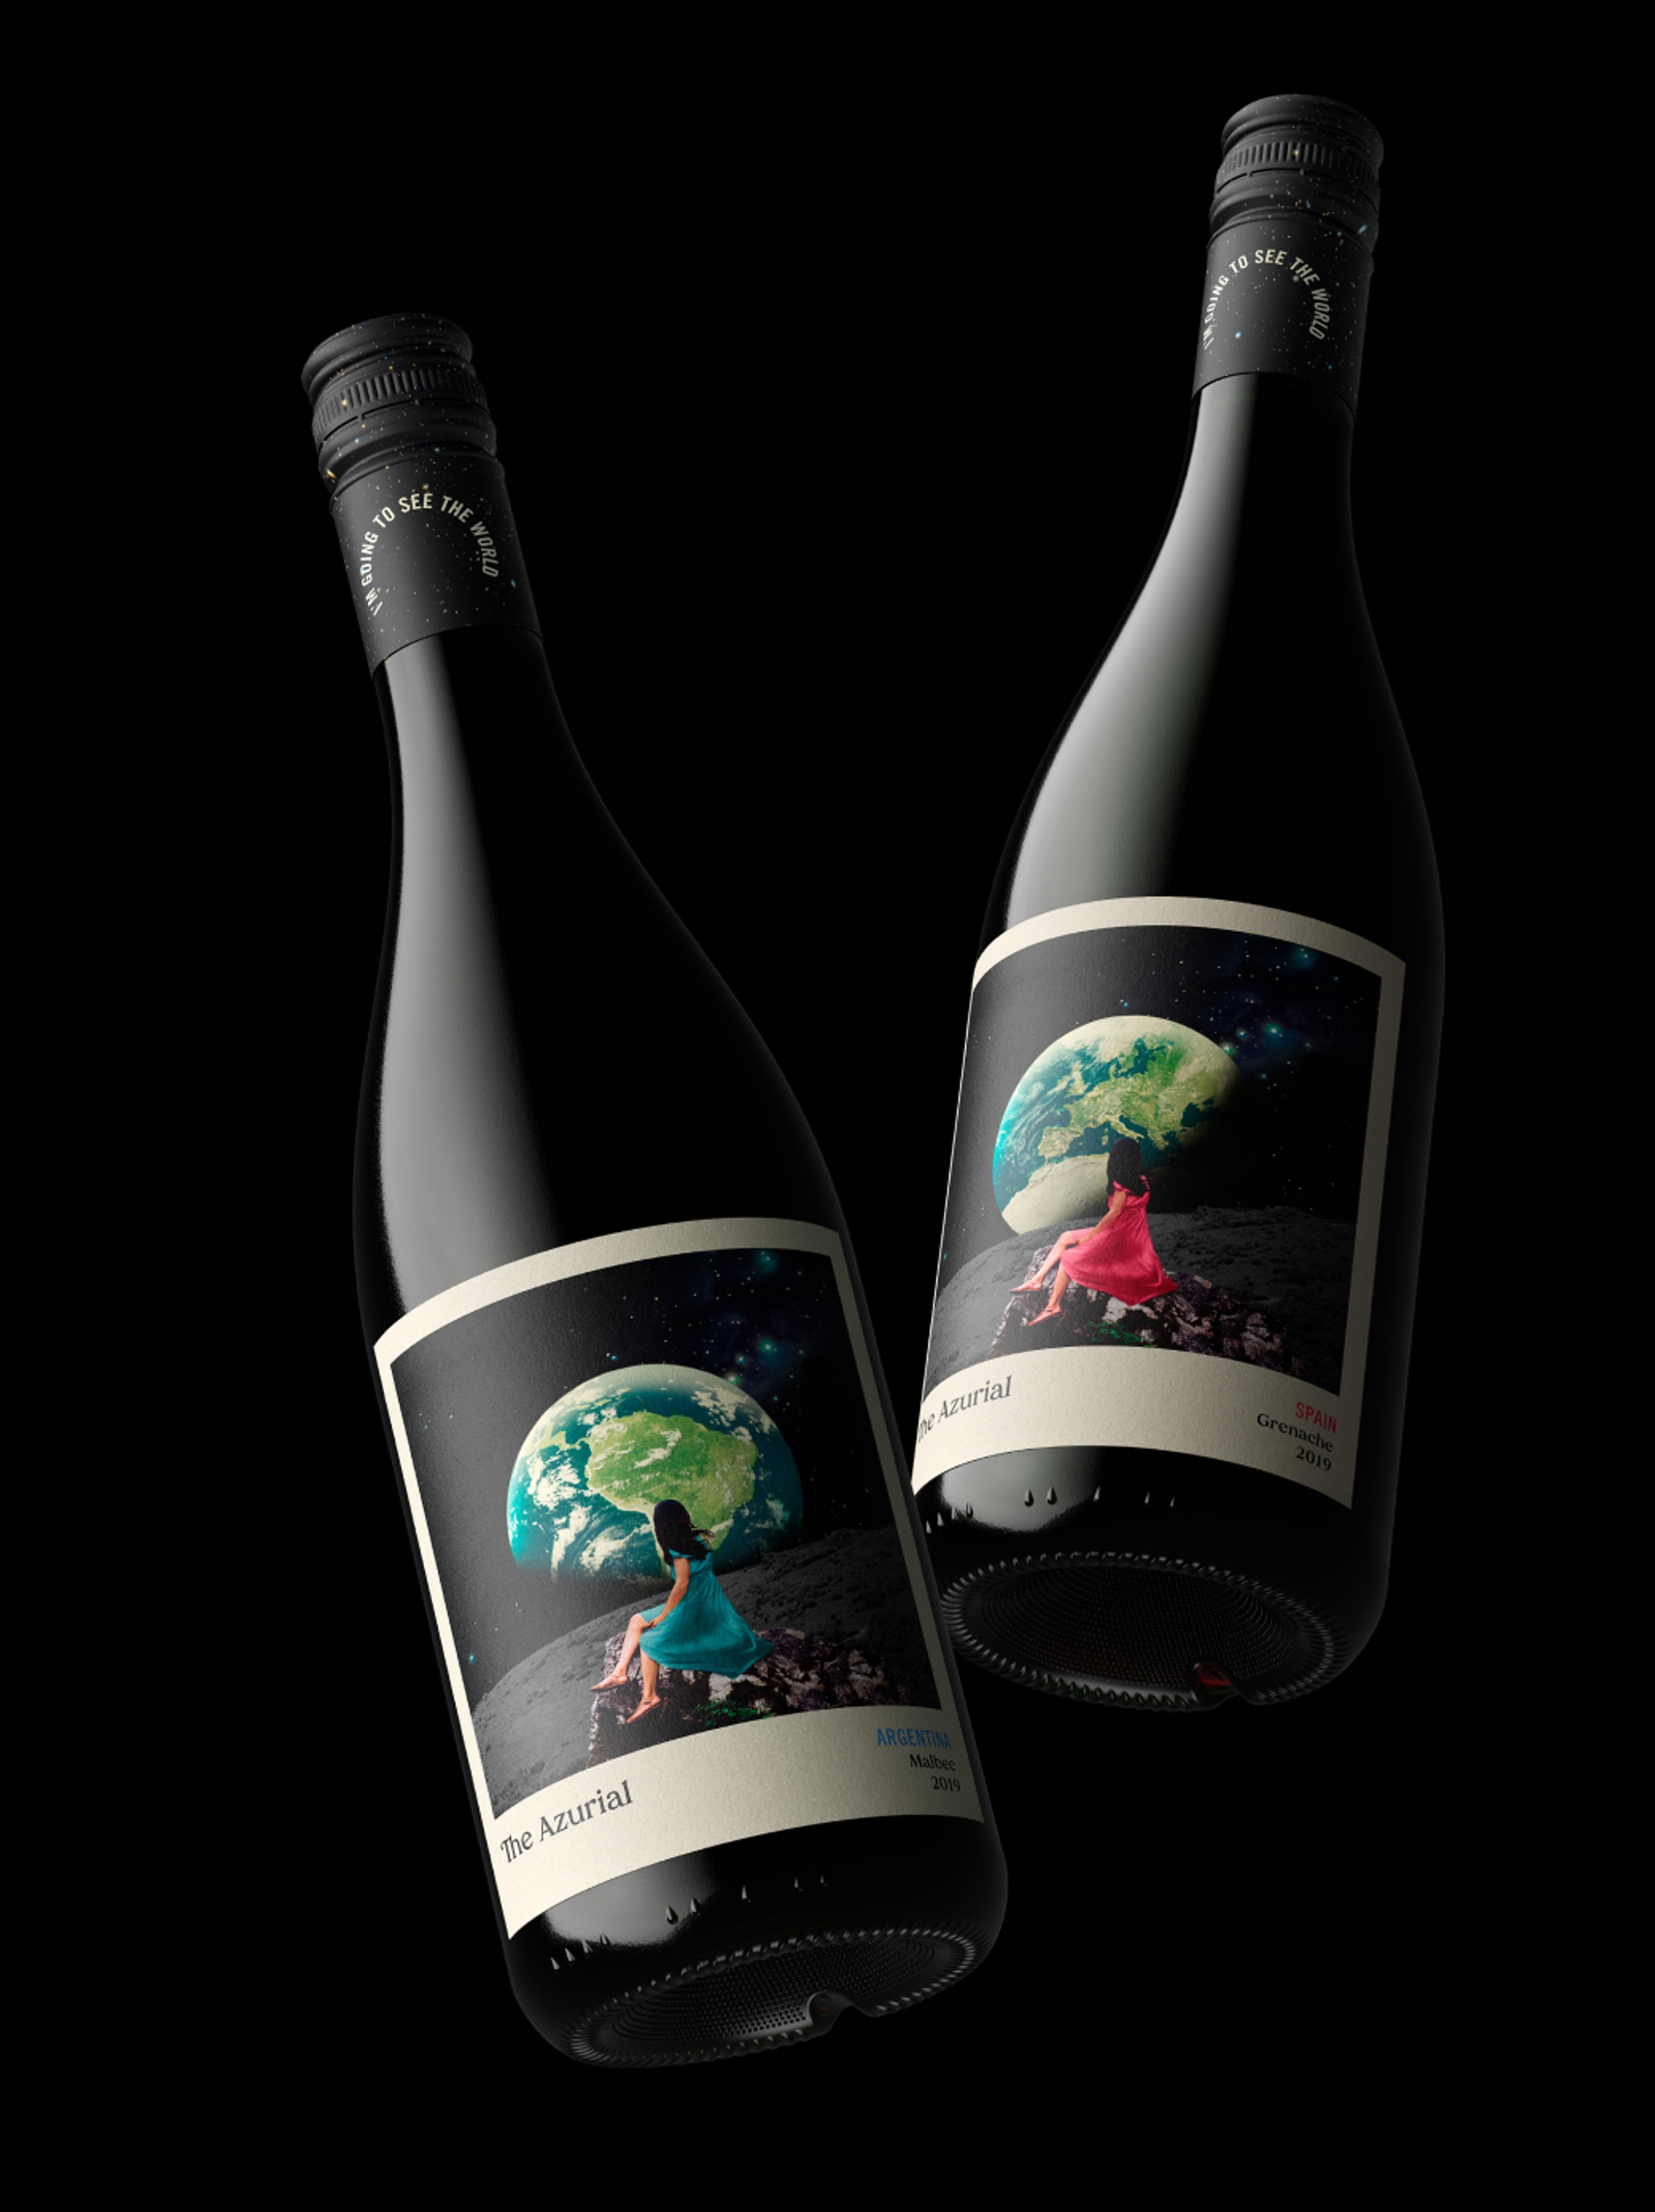 Two bottles of The Azurial wine by packaging design agency Sydney Our Revolution, on a simple black background